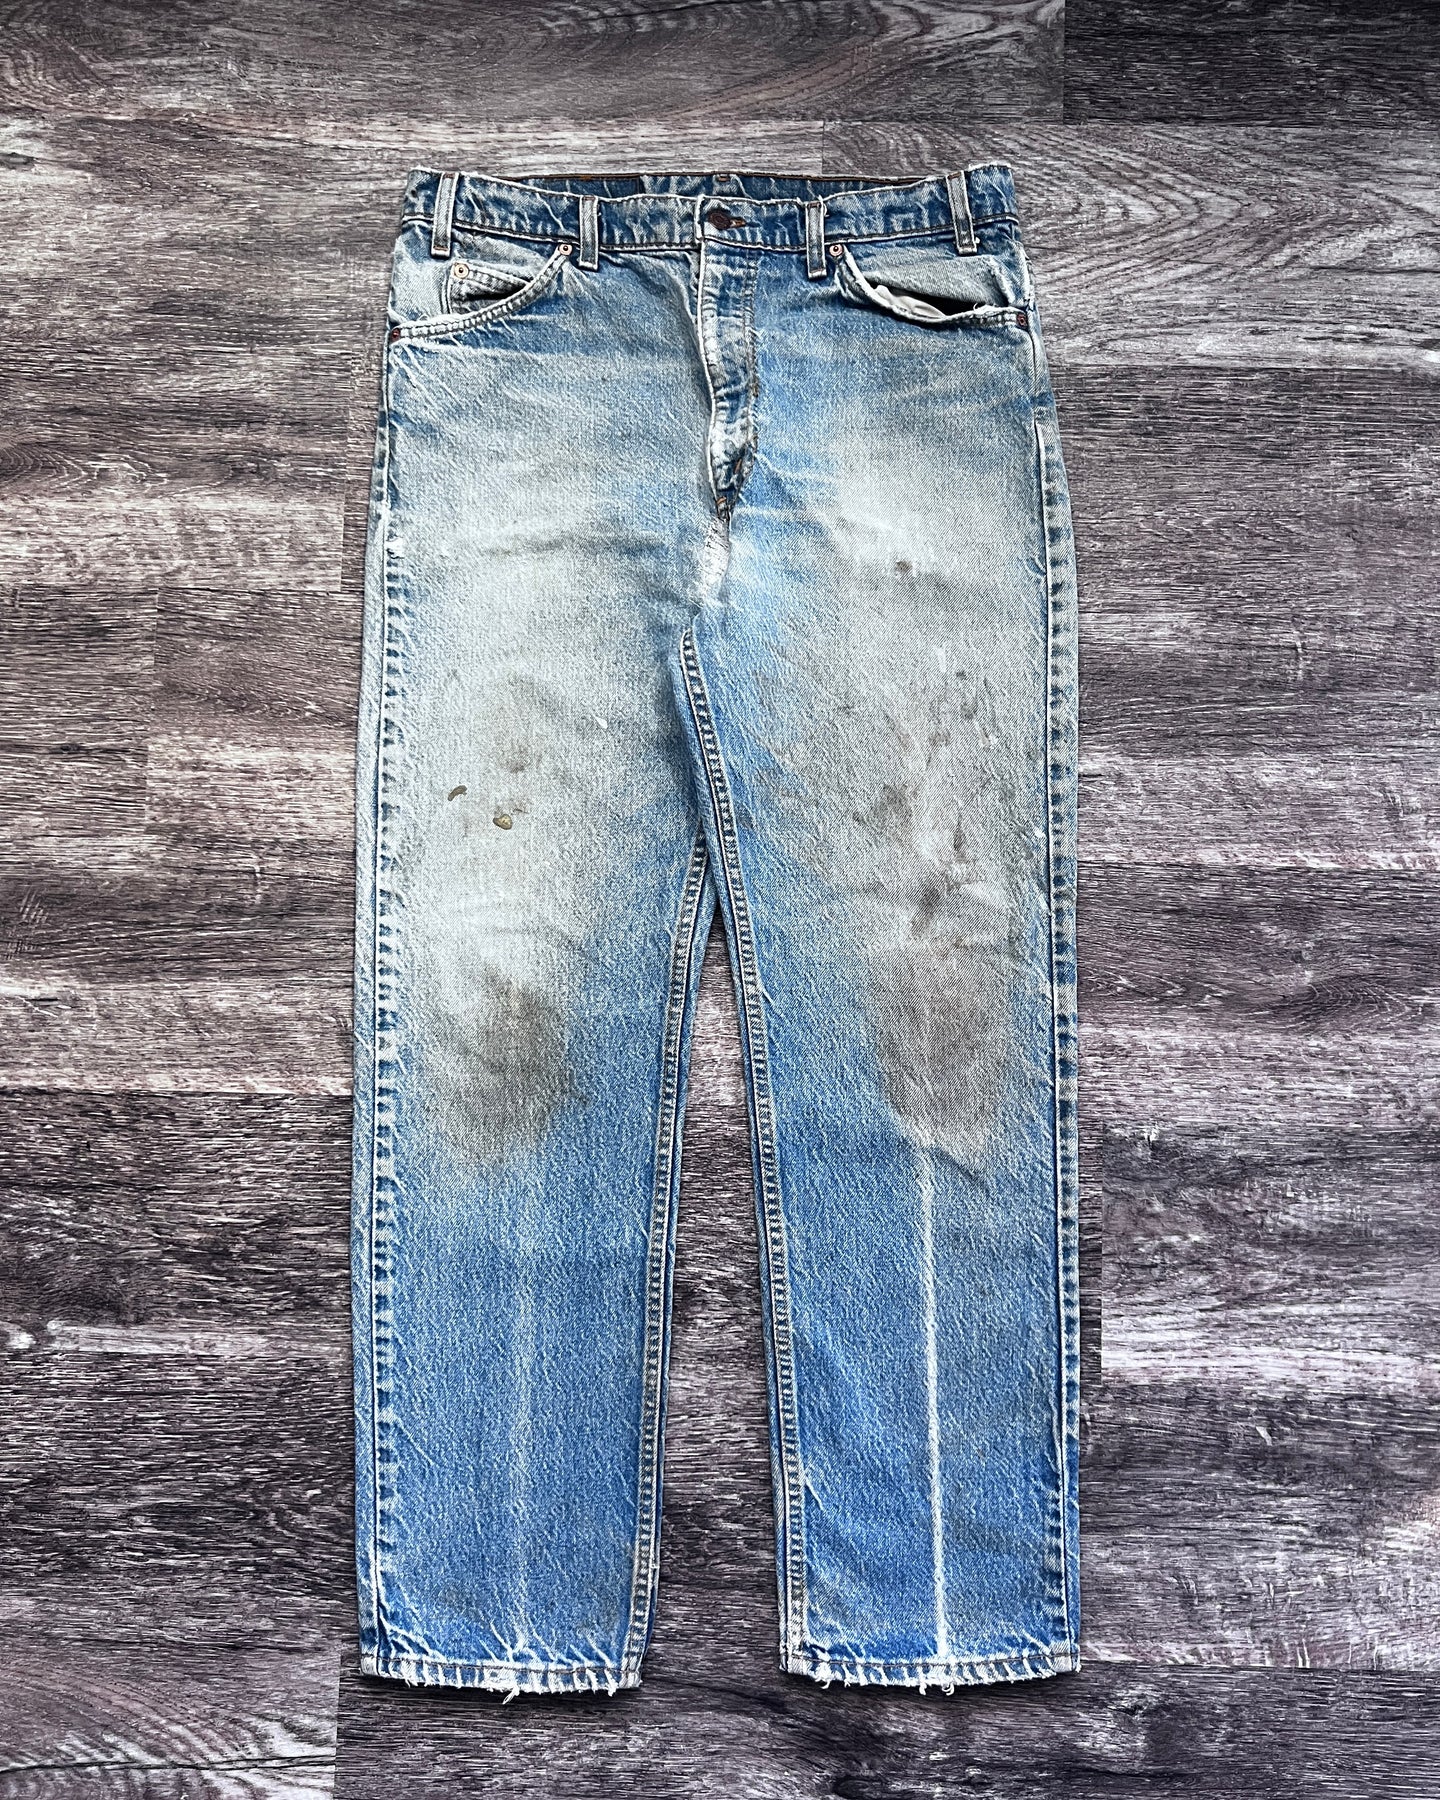 1990s Levi's Dirty Wash Repaired Orange Tab 505 - Size 34 x 30